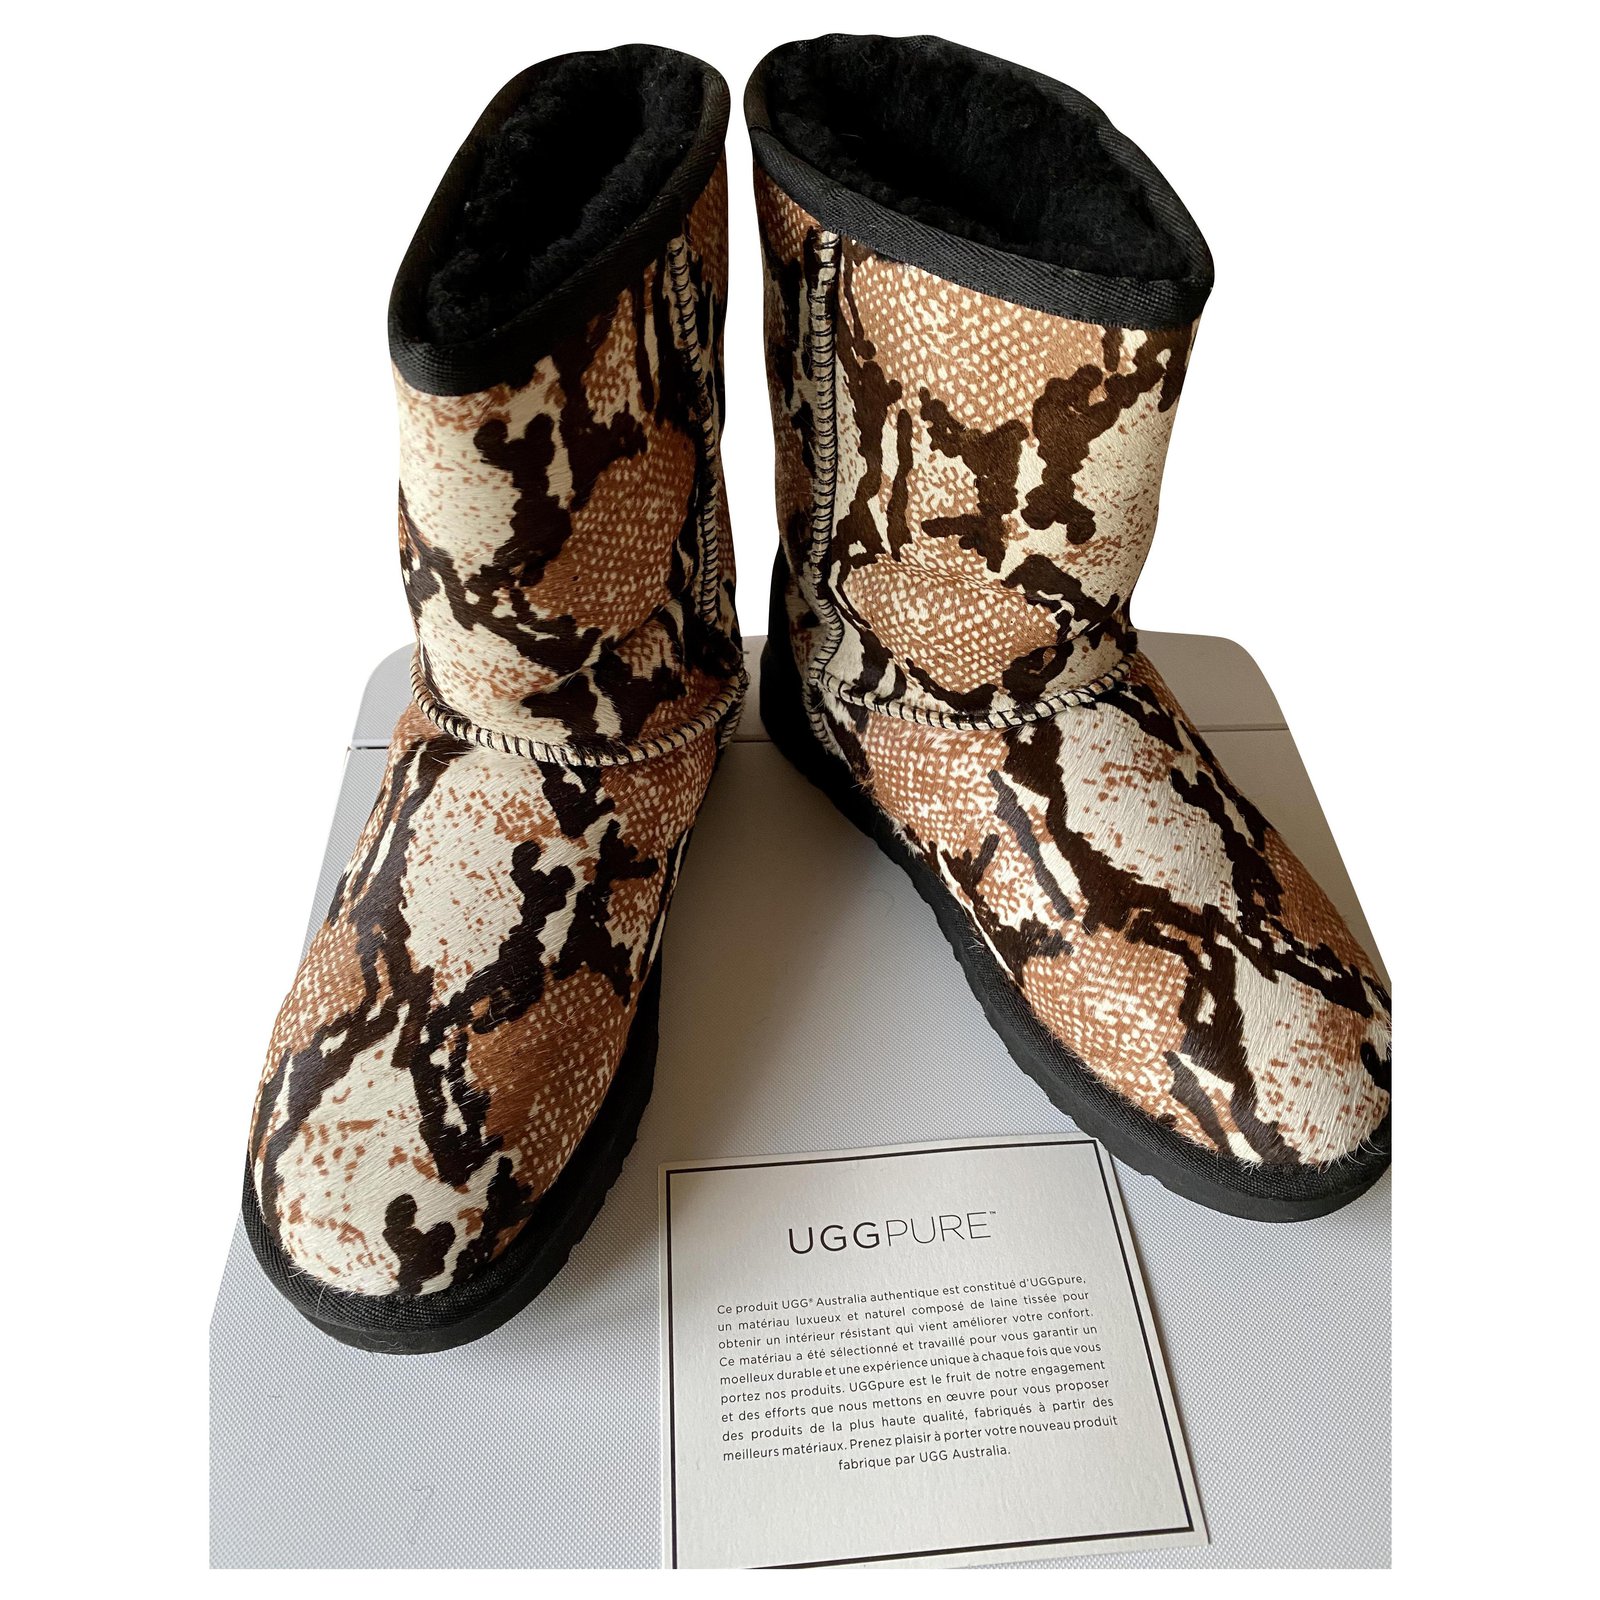 ugg pony hair boots